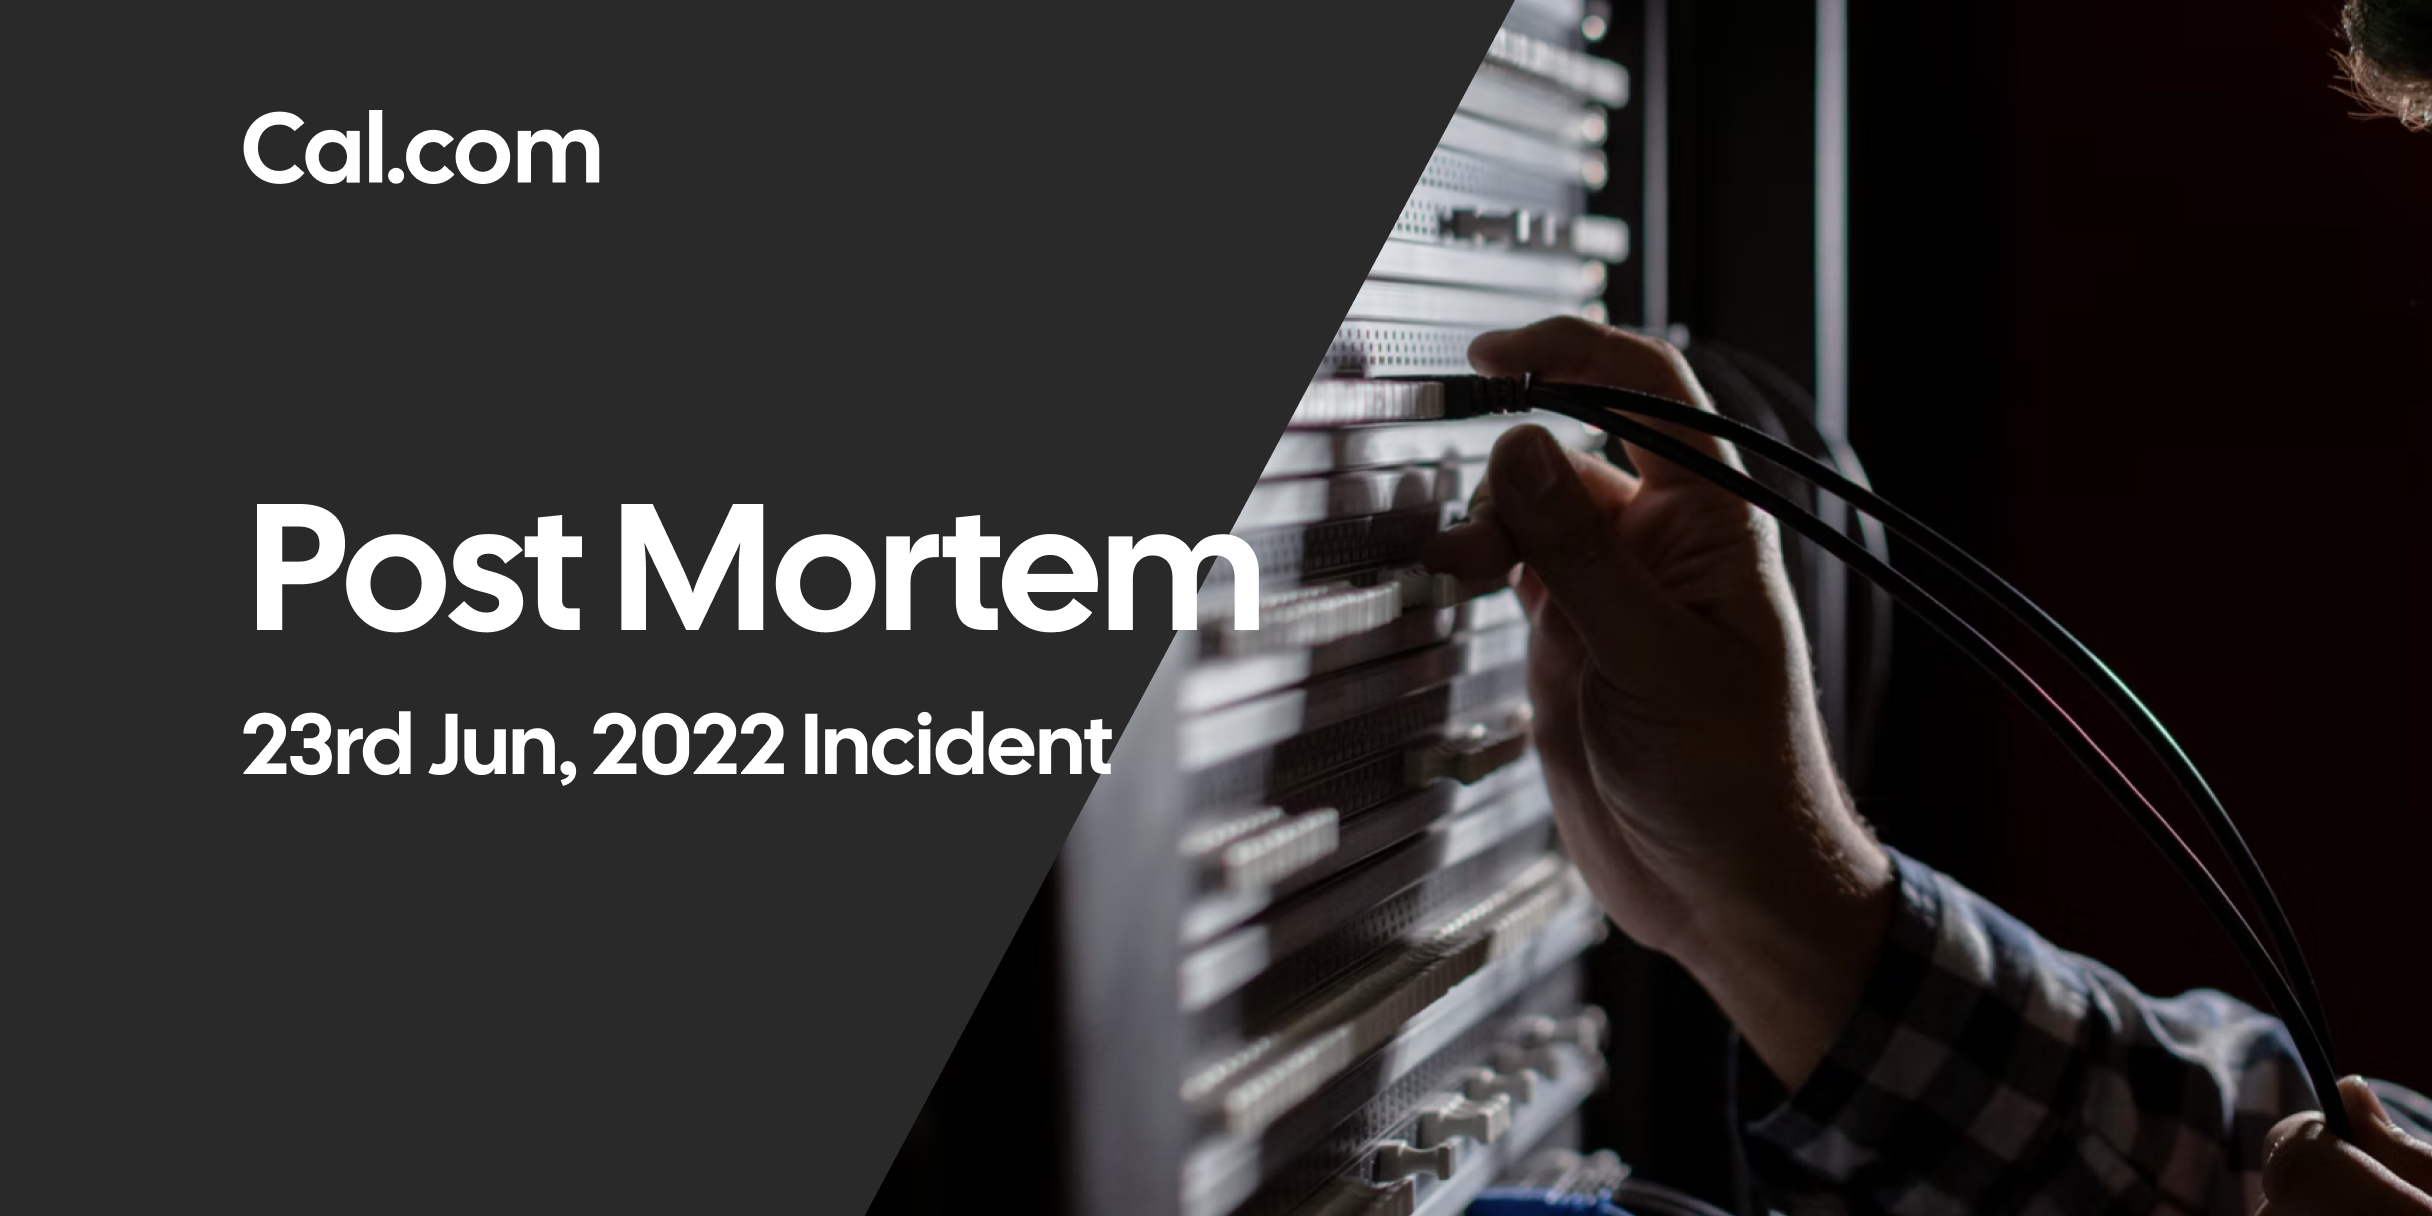 Cover Image for Post Mortem 23rd Jun, 2022 Incident